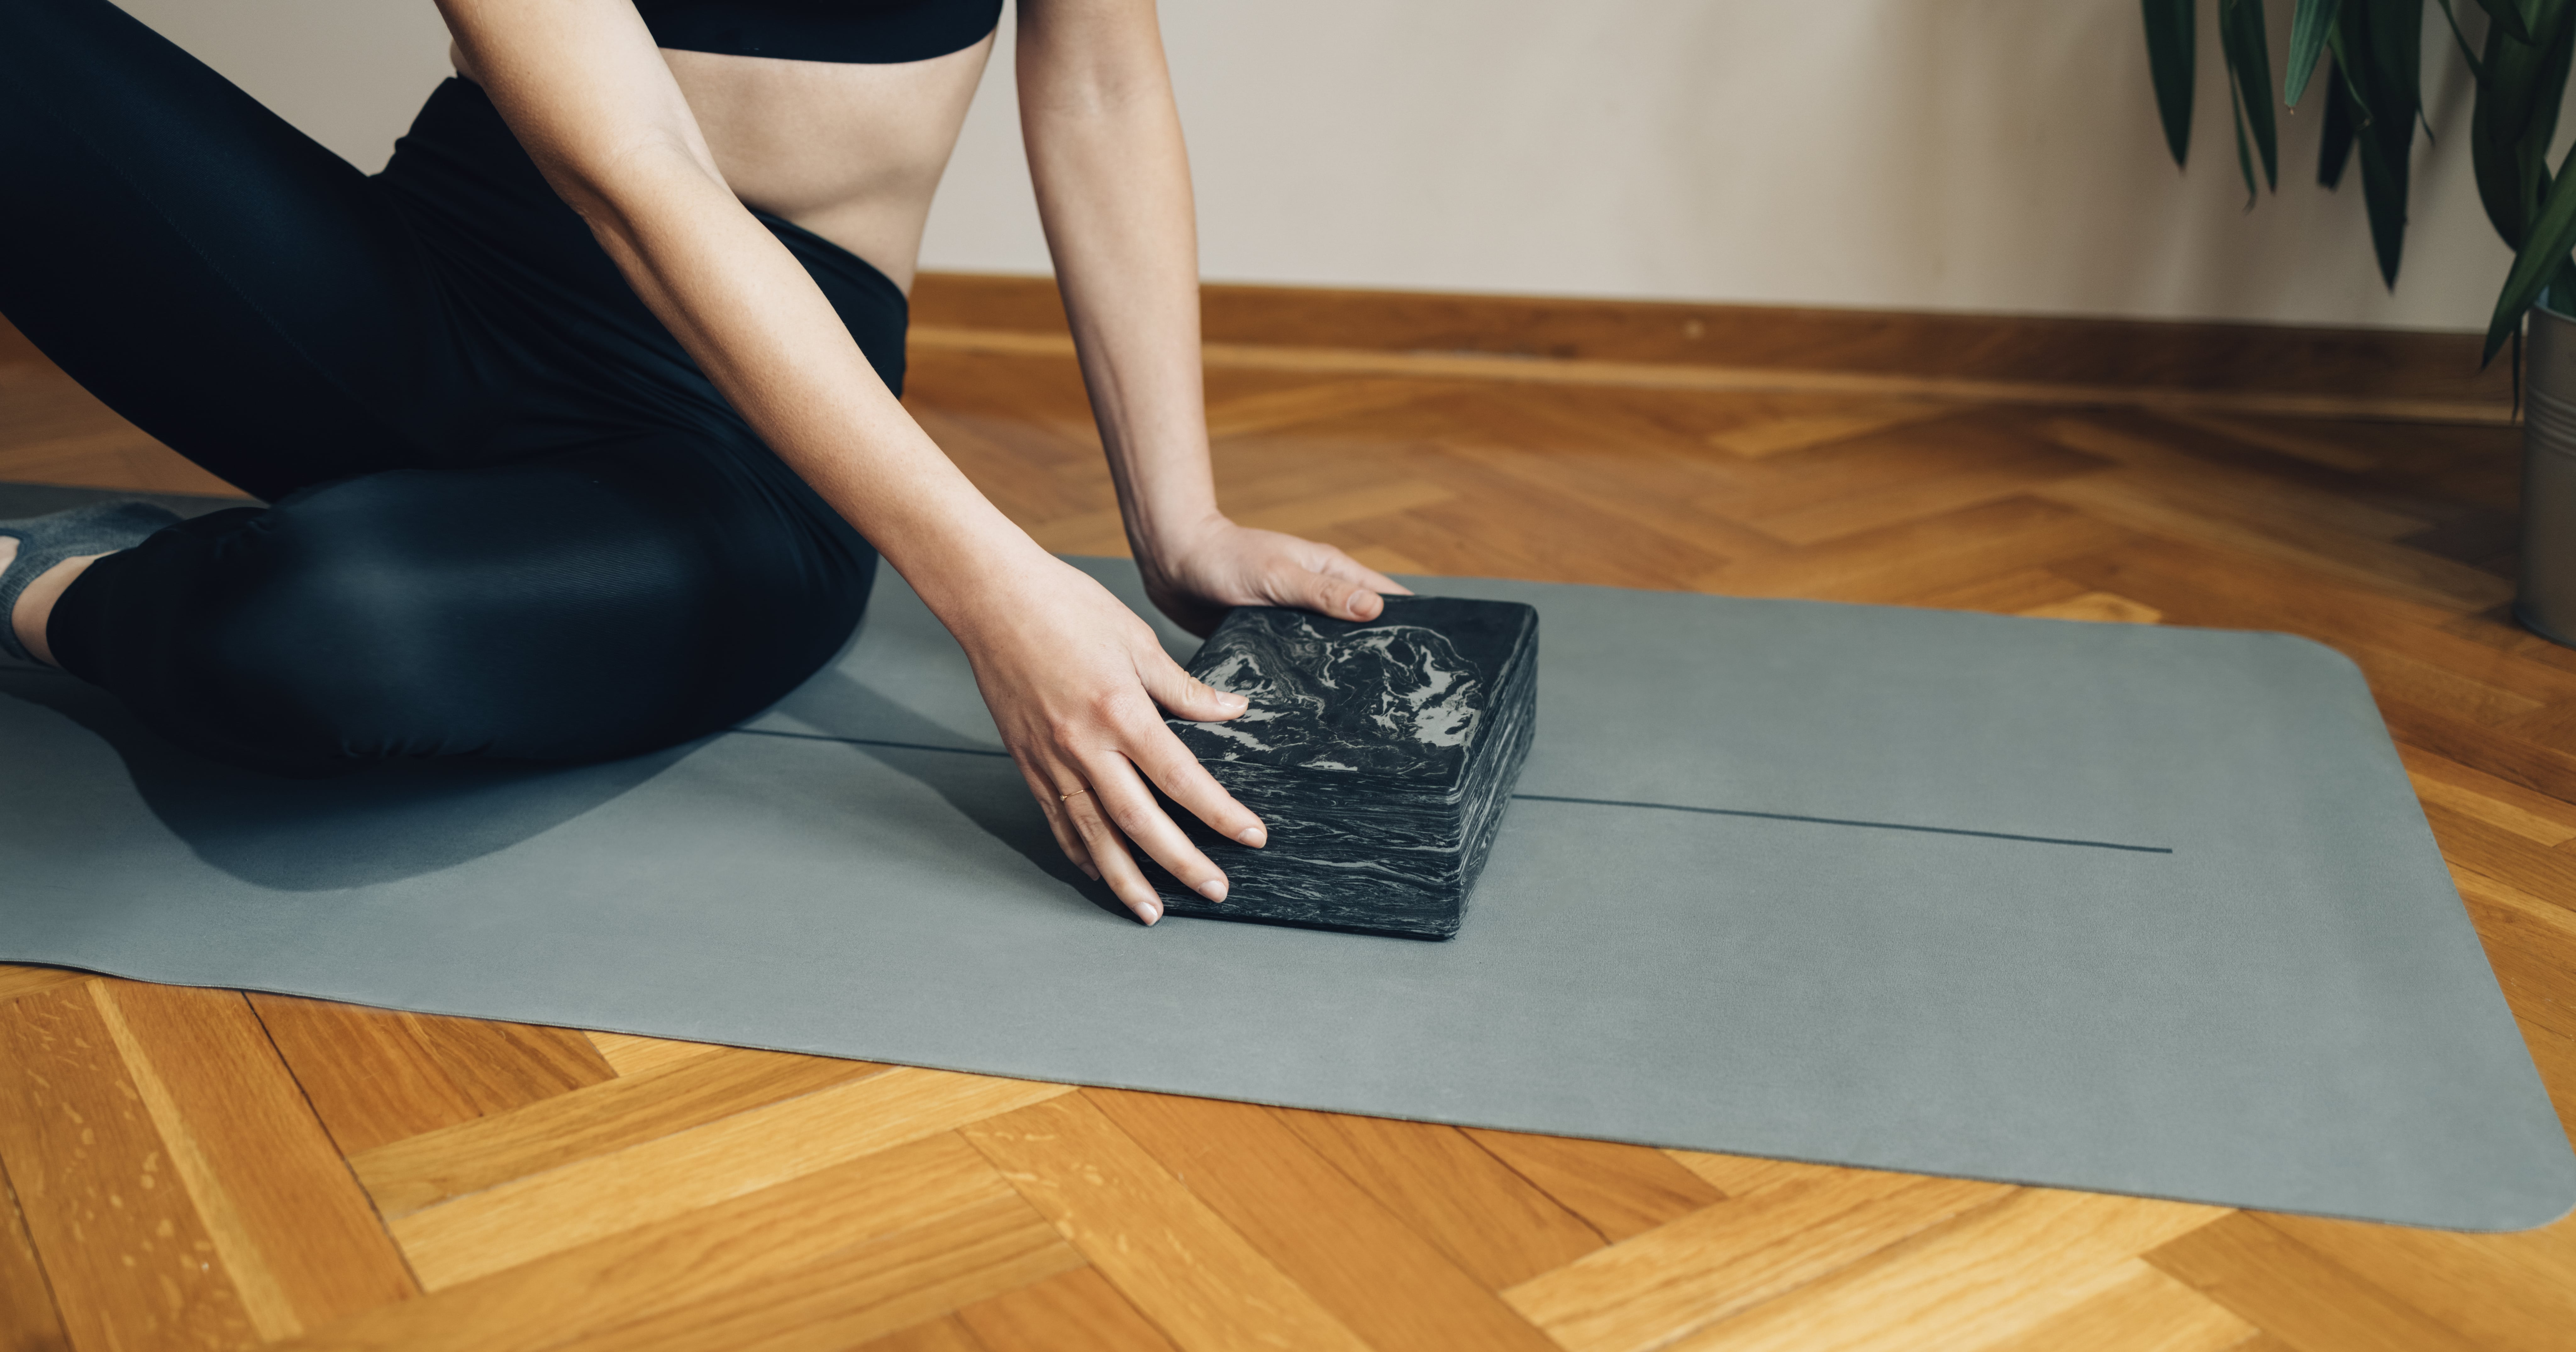 5 Reasons Why Cork Yoga Mats and Blocks Are Best For Hot Yoga